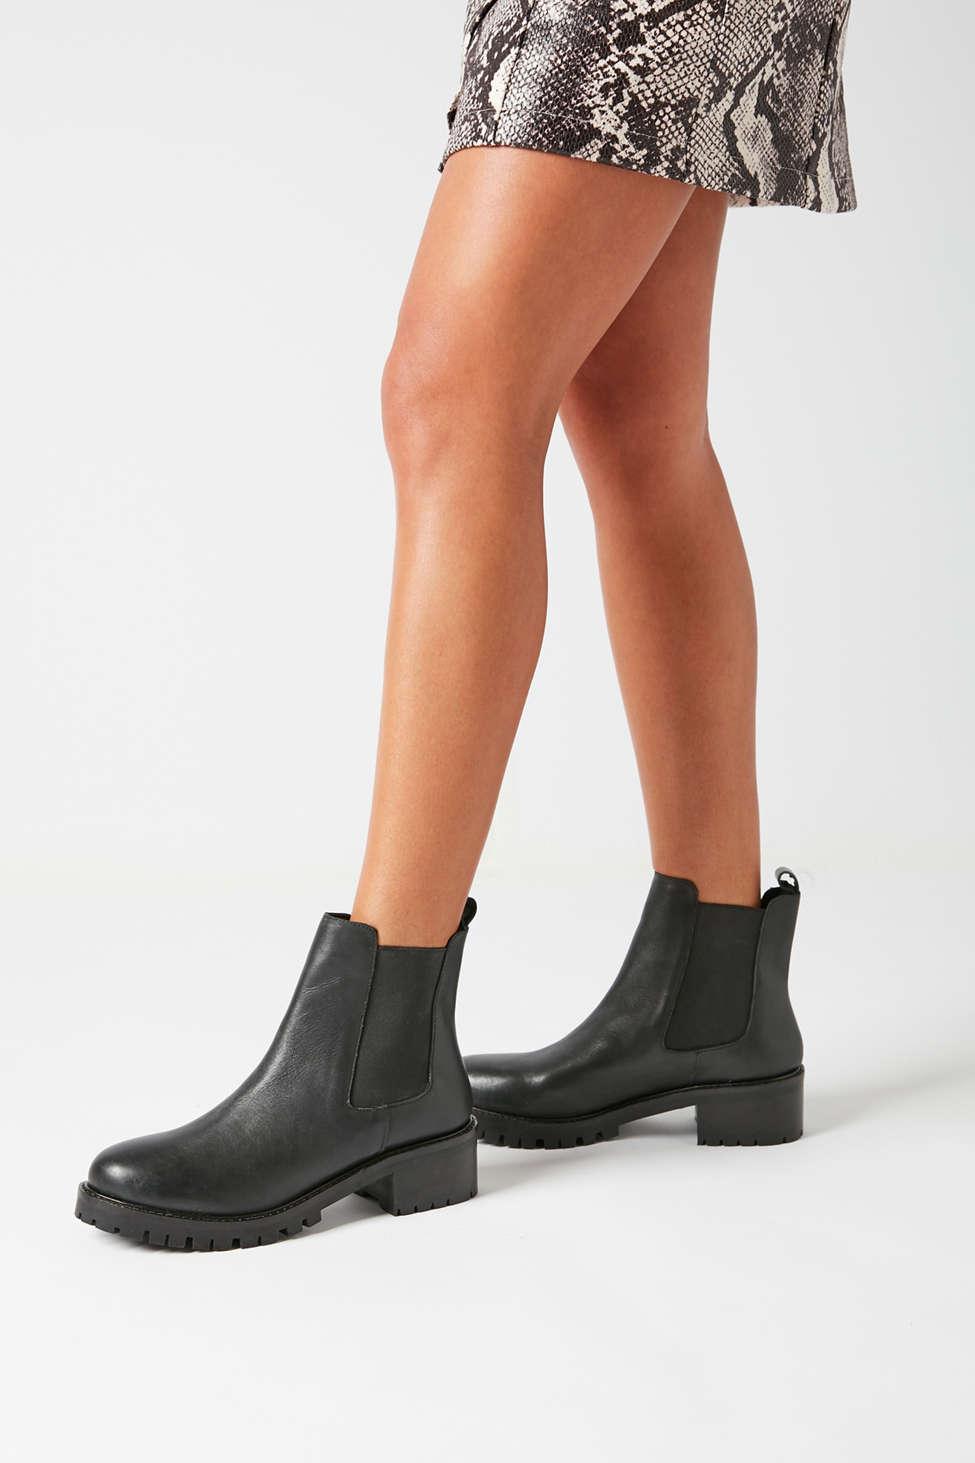 Urban Outfitters Leather Uo Zoe Chelsea 